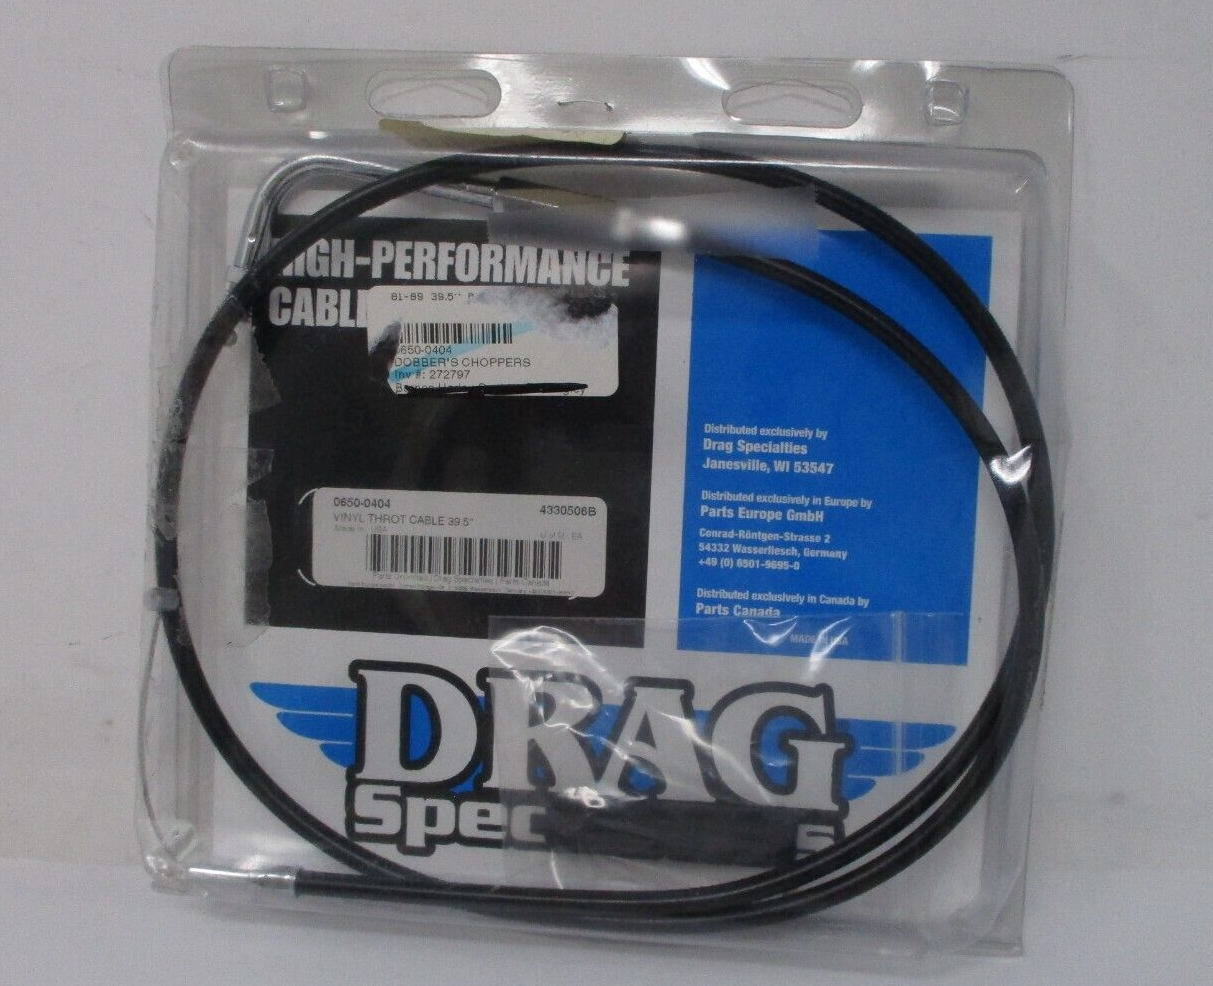 DRAG SPECIALTIES  39.5" BLACK THROTTLE CABLE  4330506B